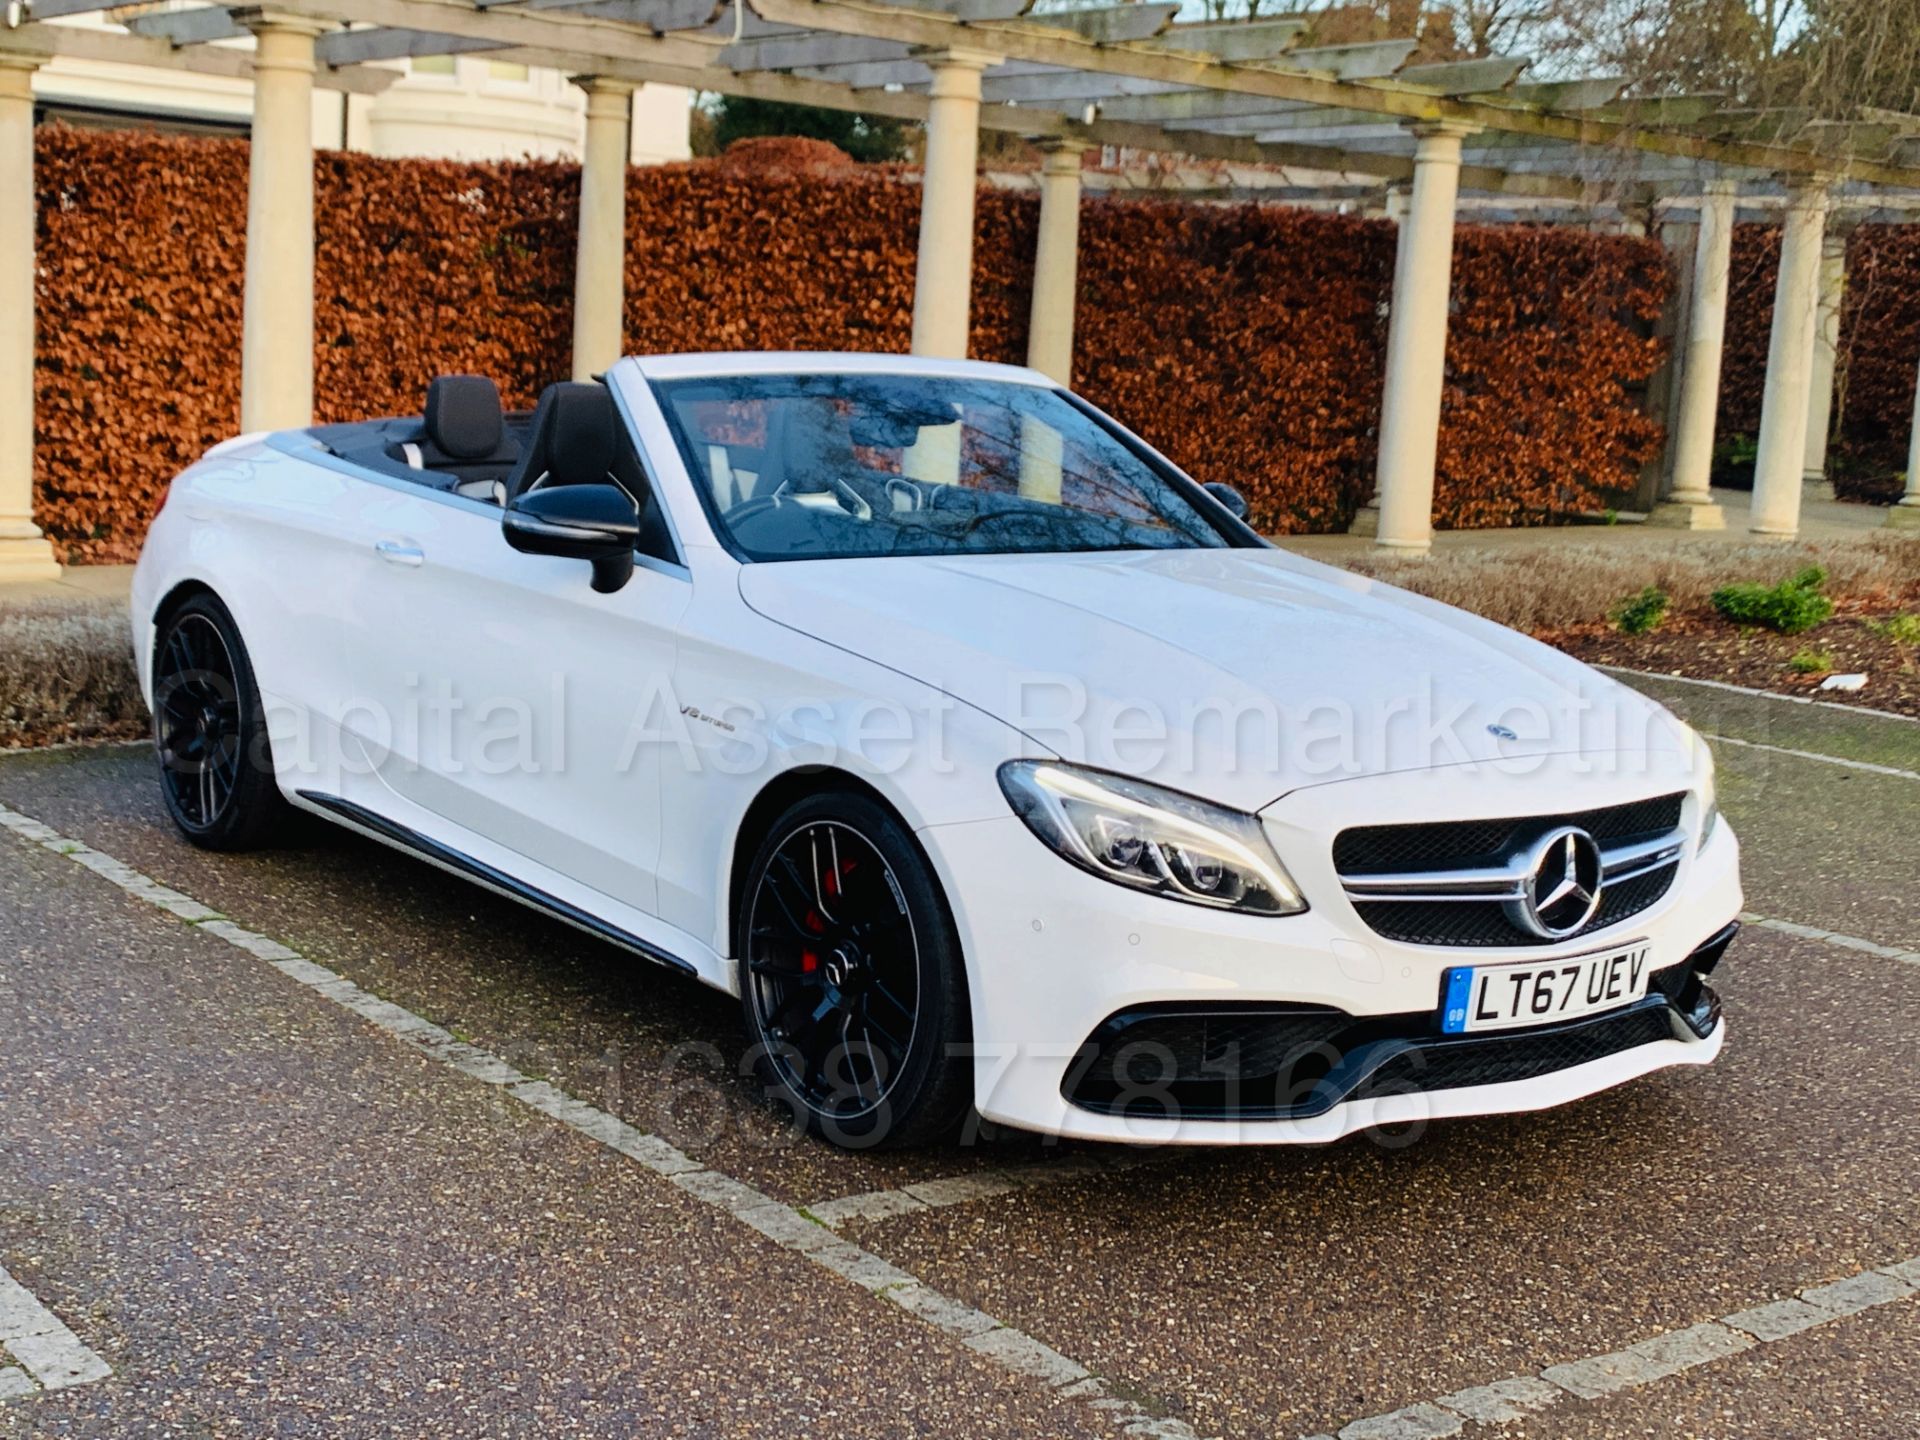 (On Sale) MERCEDES-BENZ AMG C63-S *CABRIOLET* (67 REG) '4.0 BI-TURBO -510 BHP - AUTO' *FULLY LOADED* - Image 5 of 79